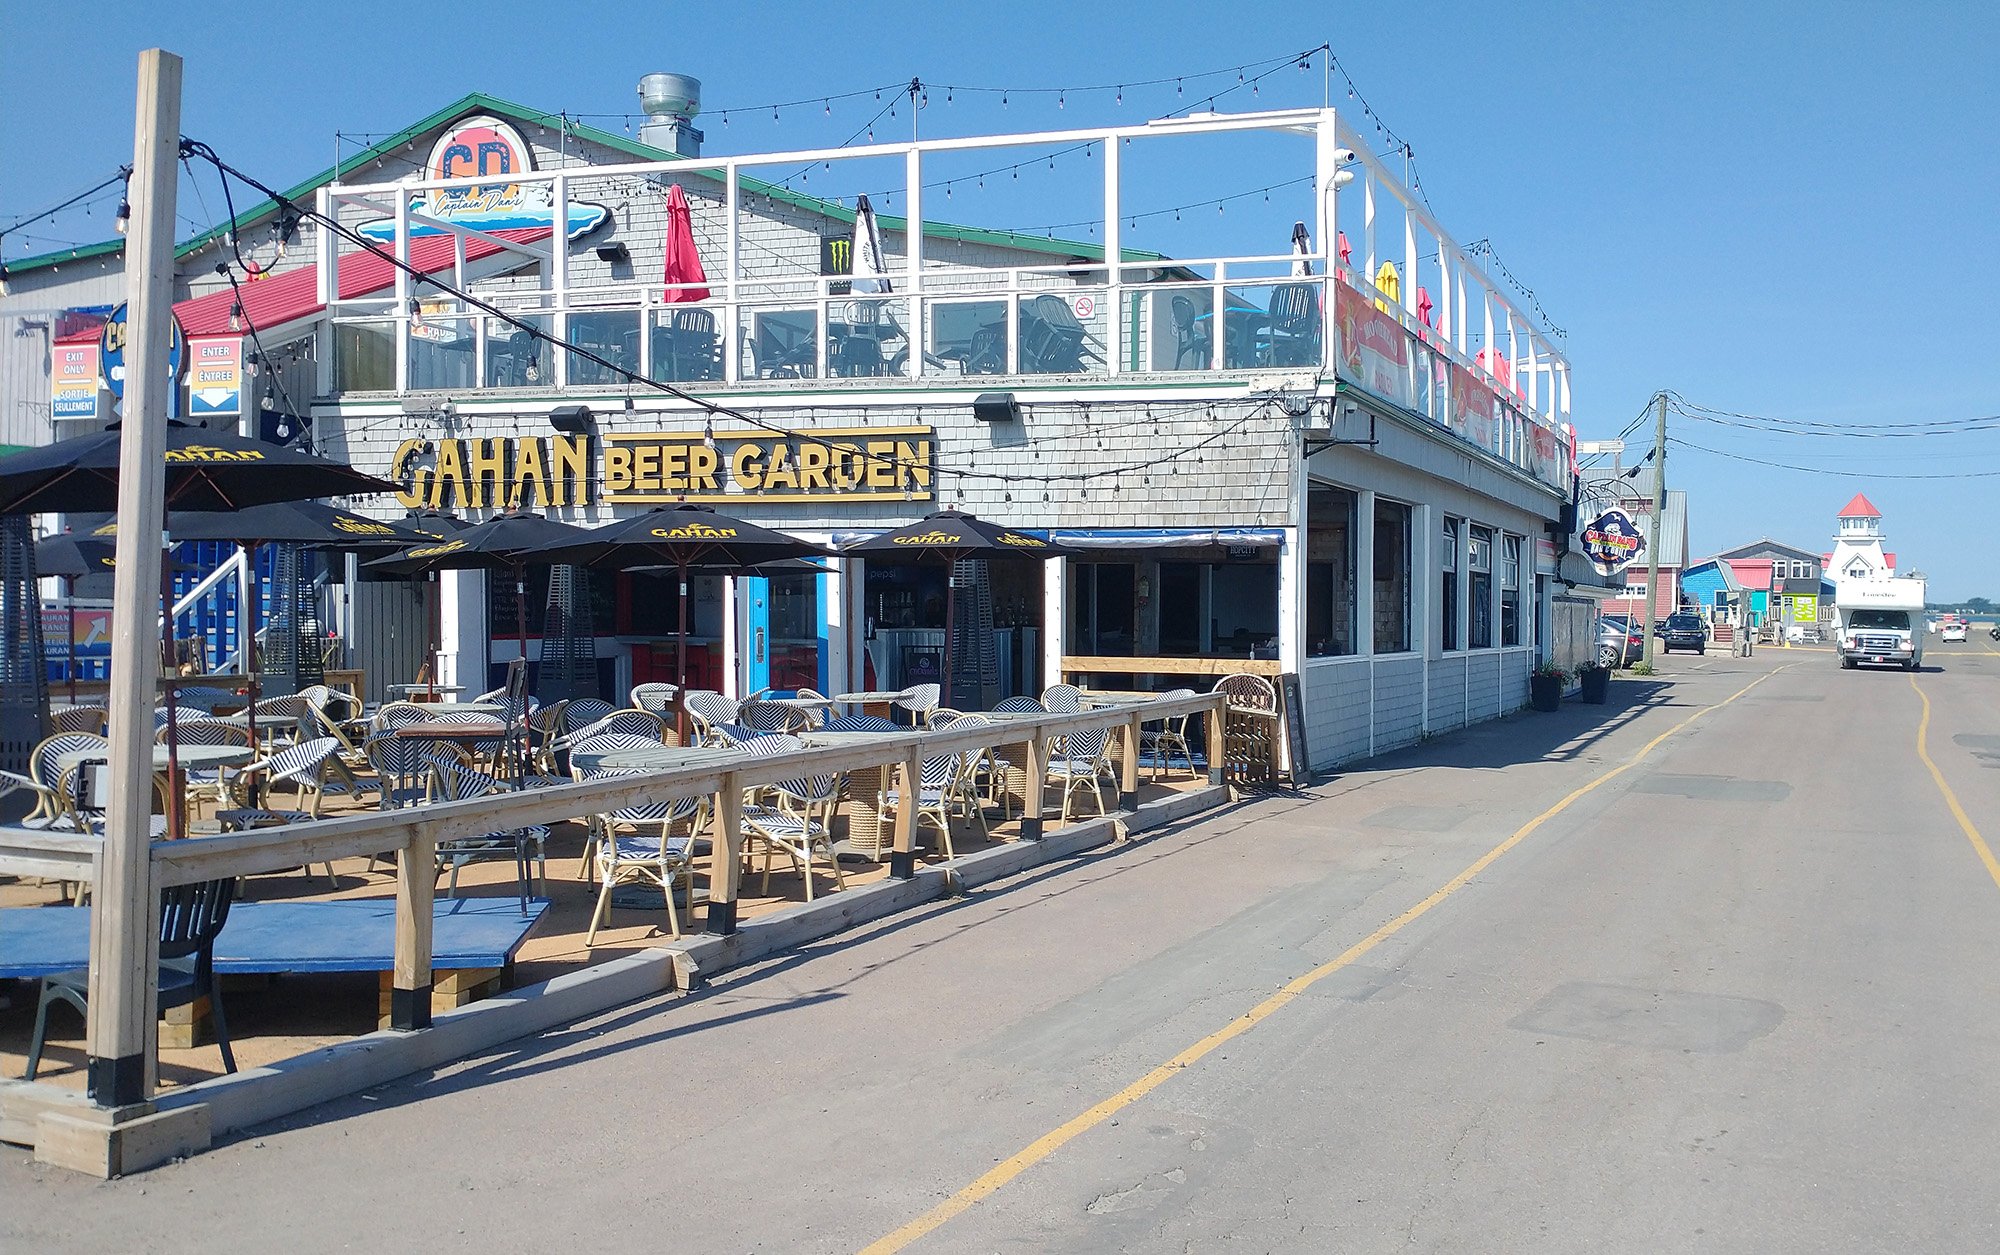 As always, restaurants on the pier. It's nice to eat by the sea.